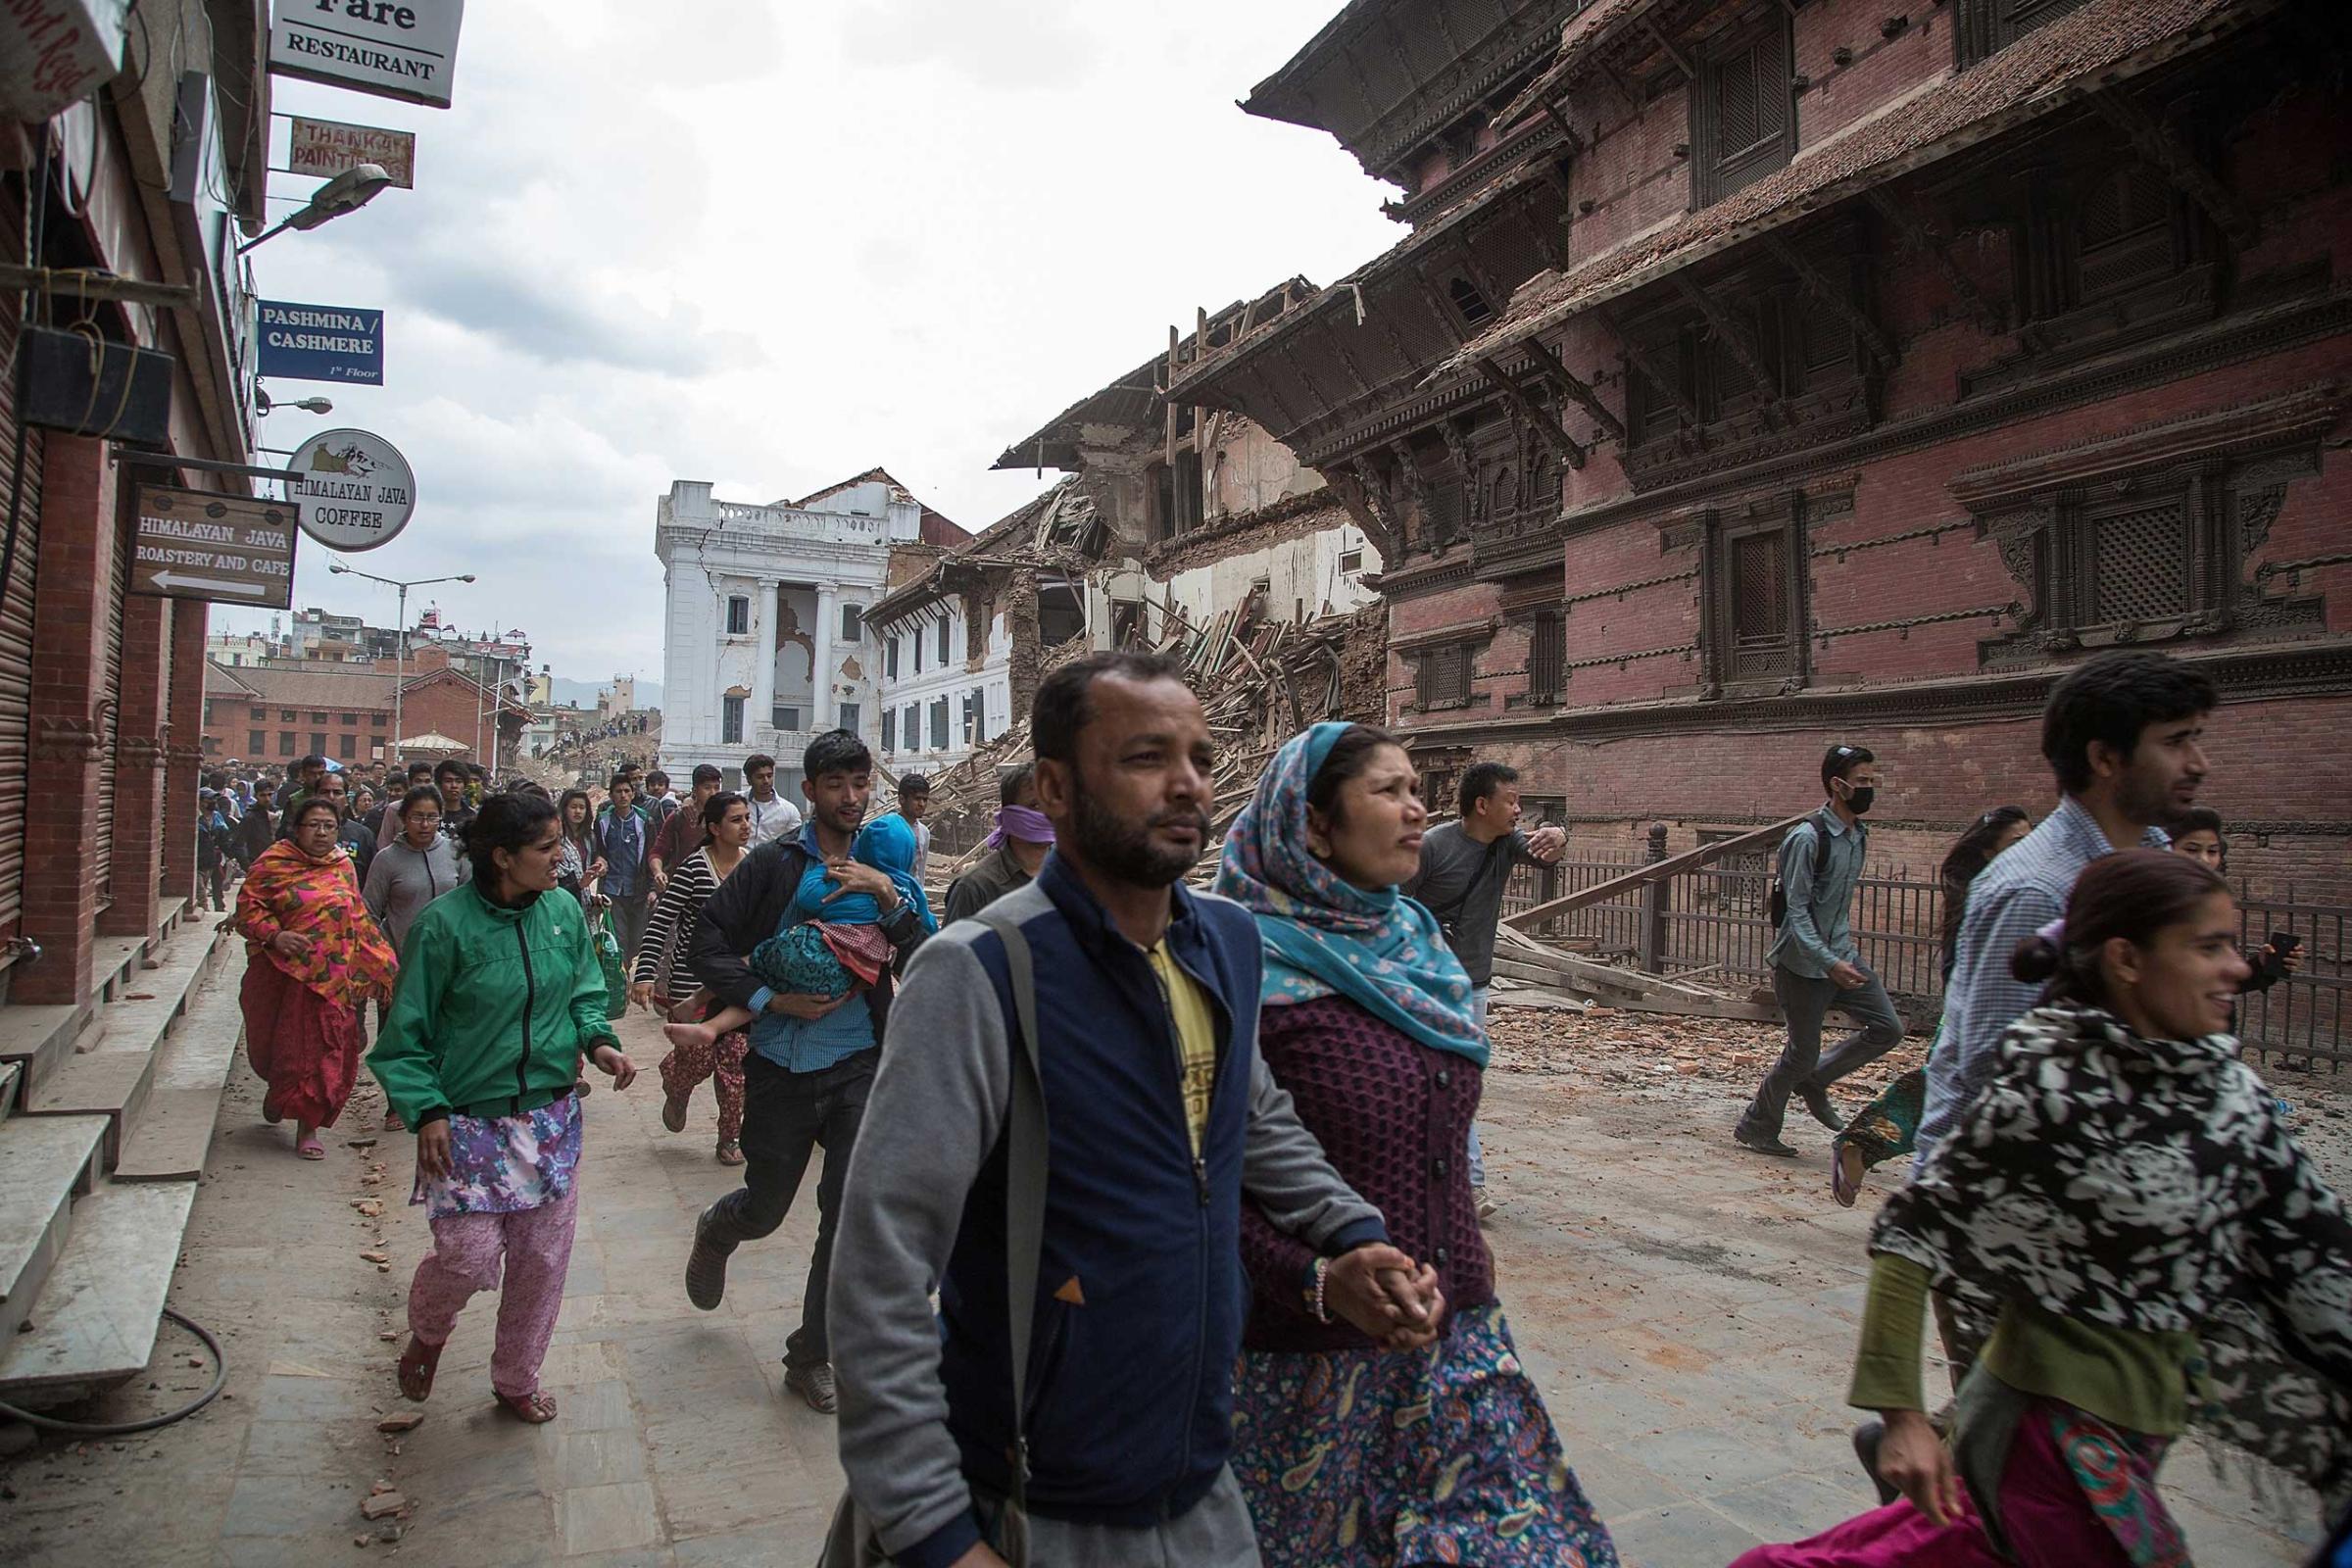 Residents run to shelters after an aftershock hit Kathmandu on April 25, 2015.